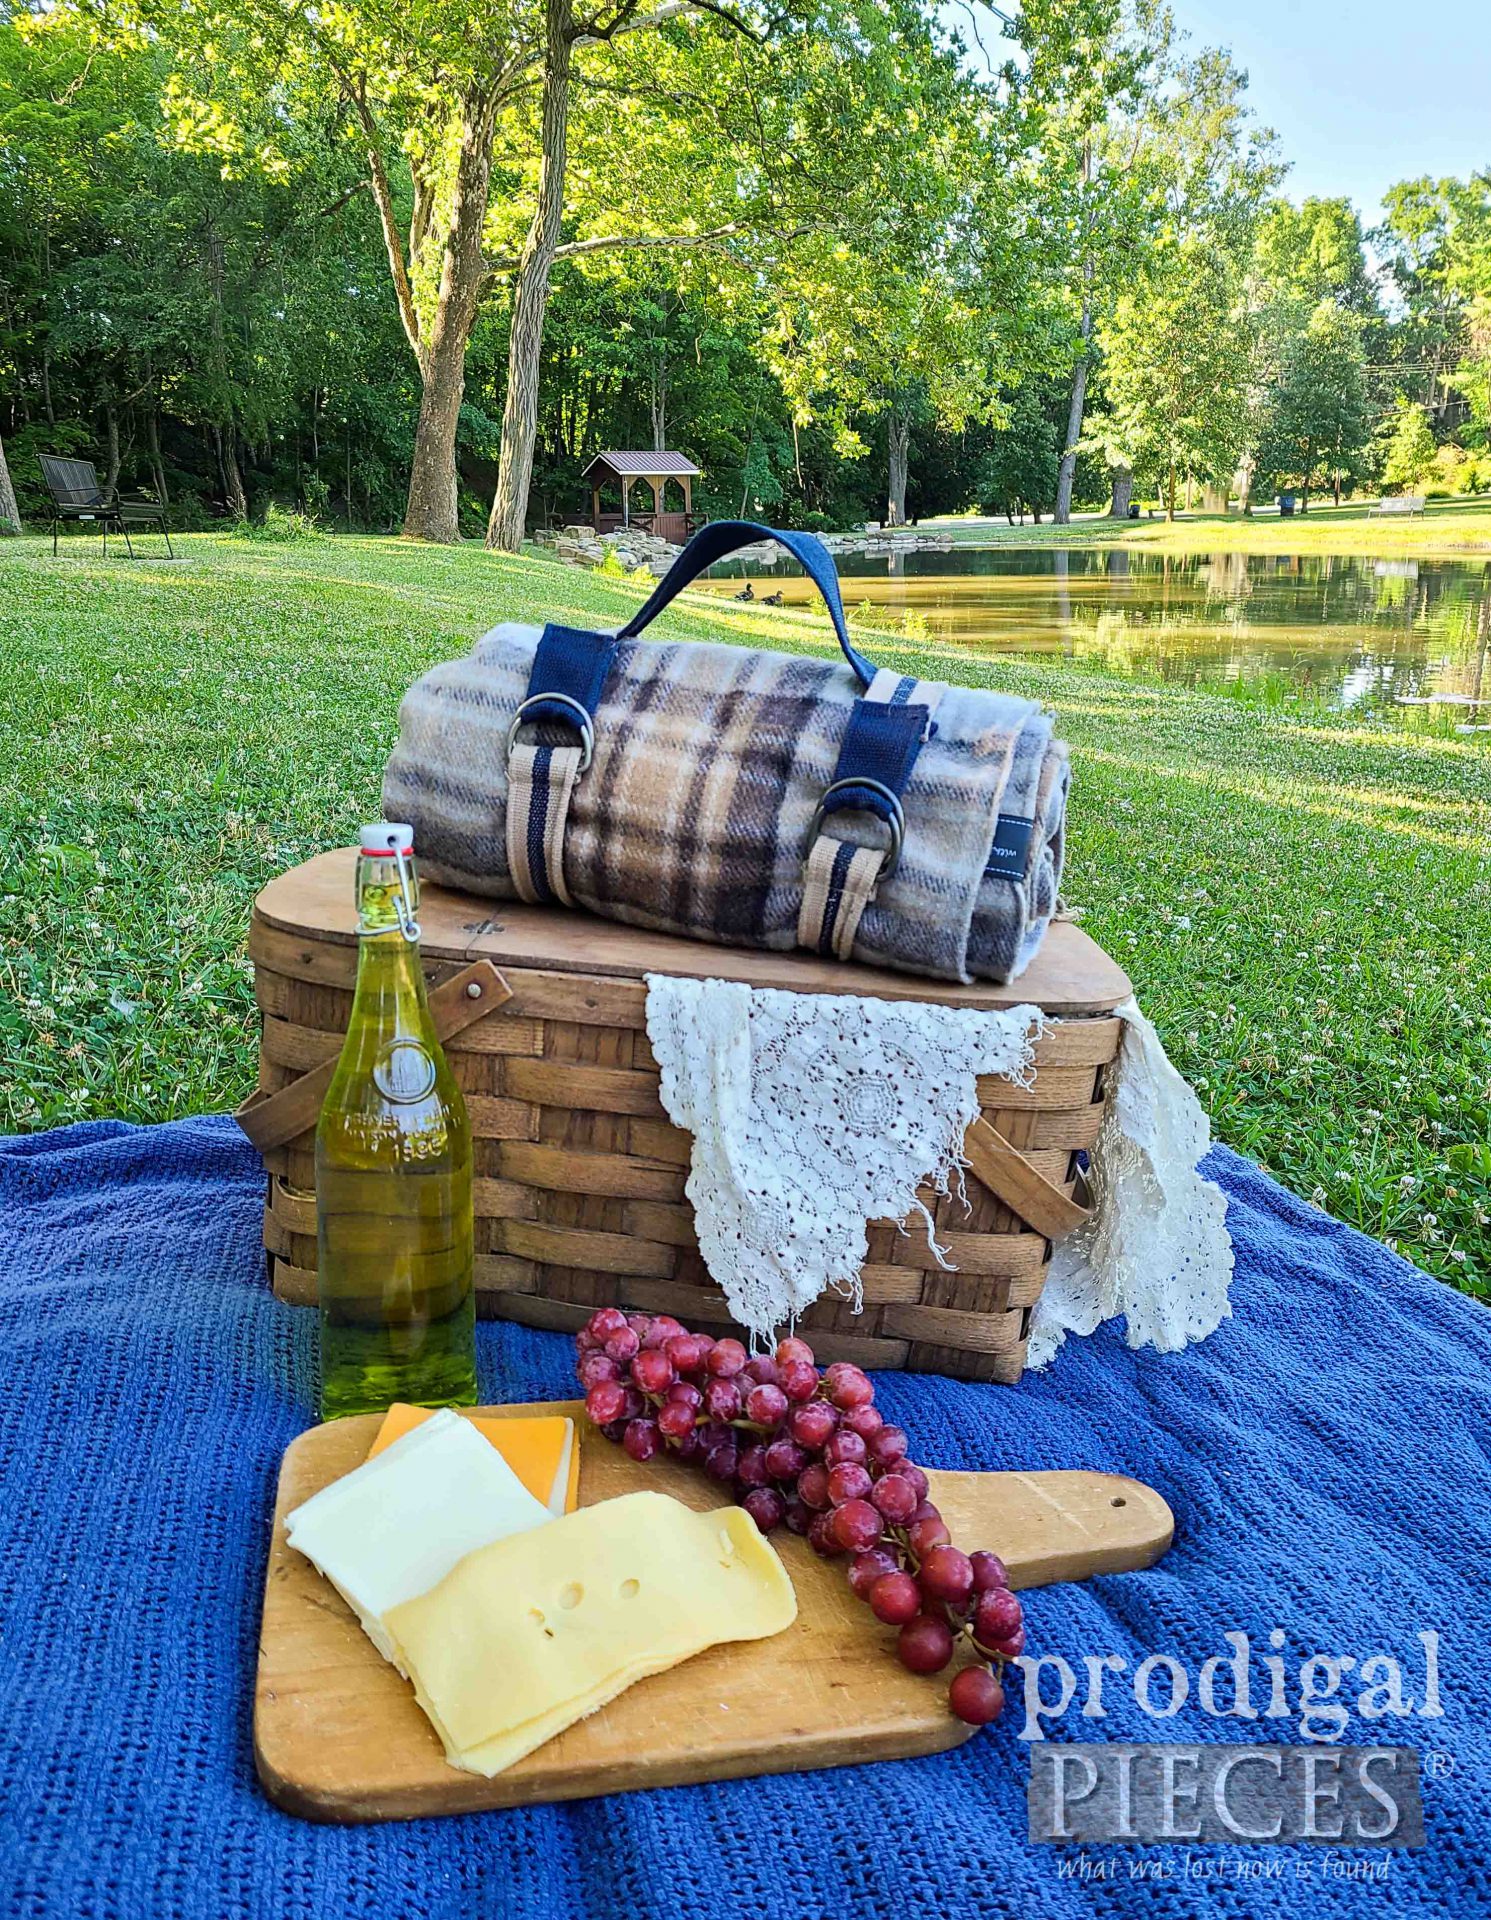 Refashioned Belts Turned into DIY Blanket Carrier for Picnic or Beach by Larissa of Prodigal Pieces | prodigalpieces.com #prodigalpieces #diy #sewing #refashion #summer